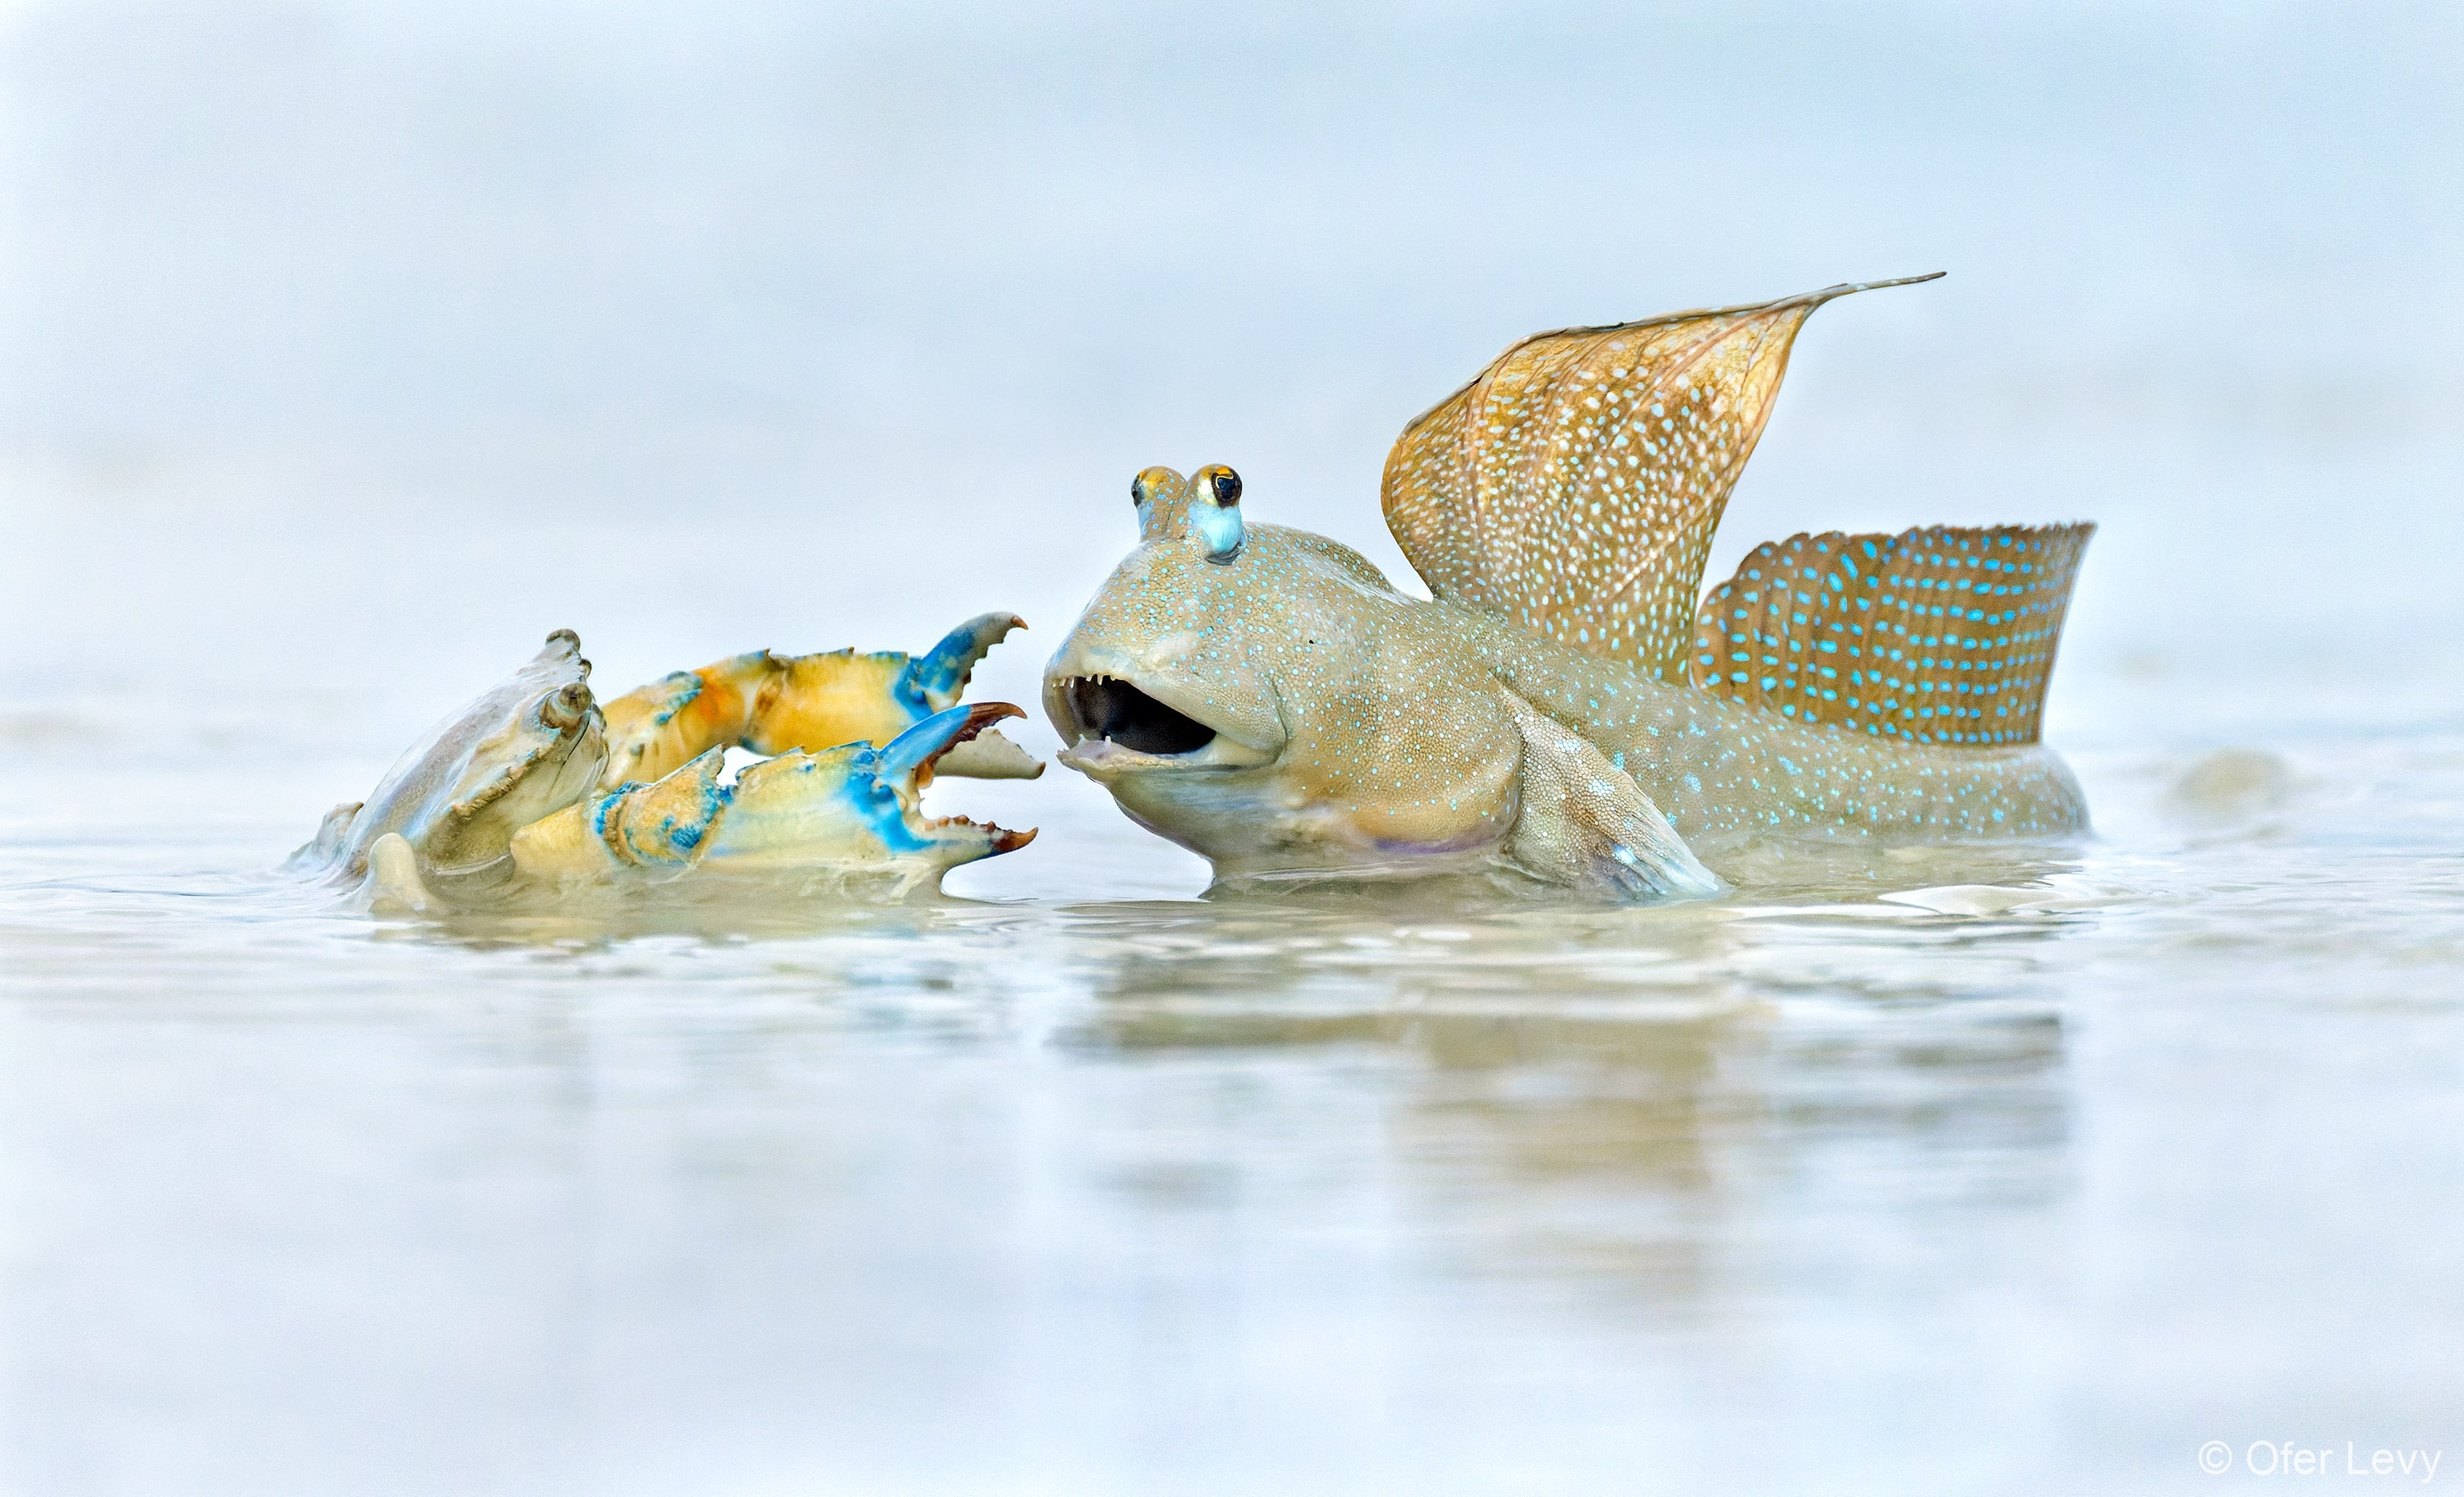 A mud crab and a bluespotted mudskipper facing each other